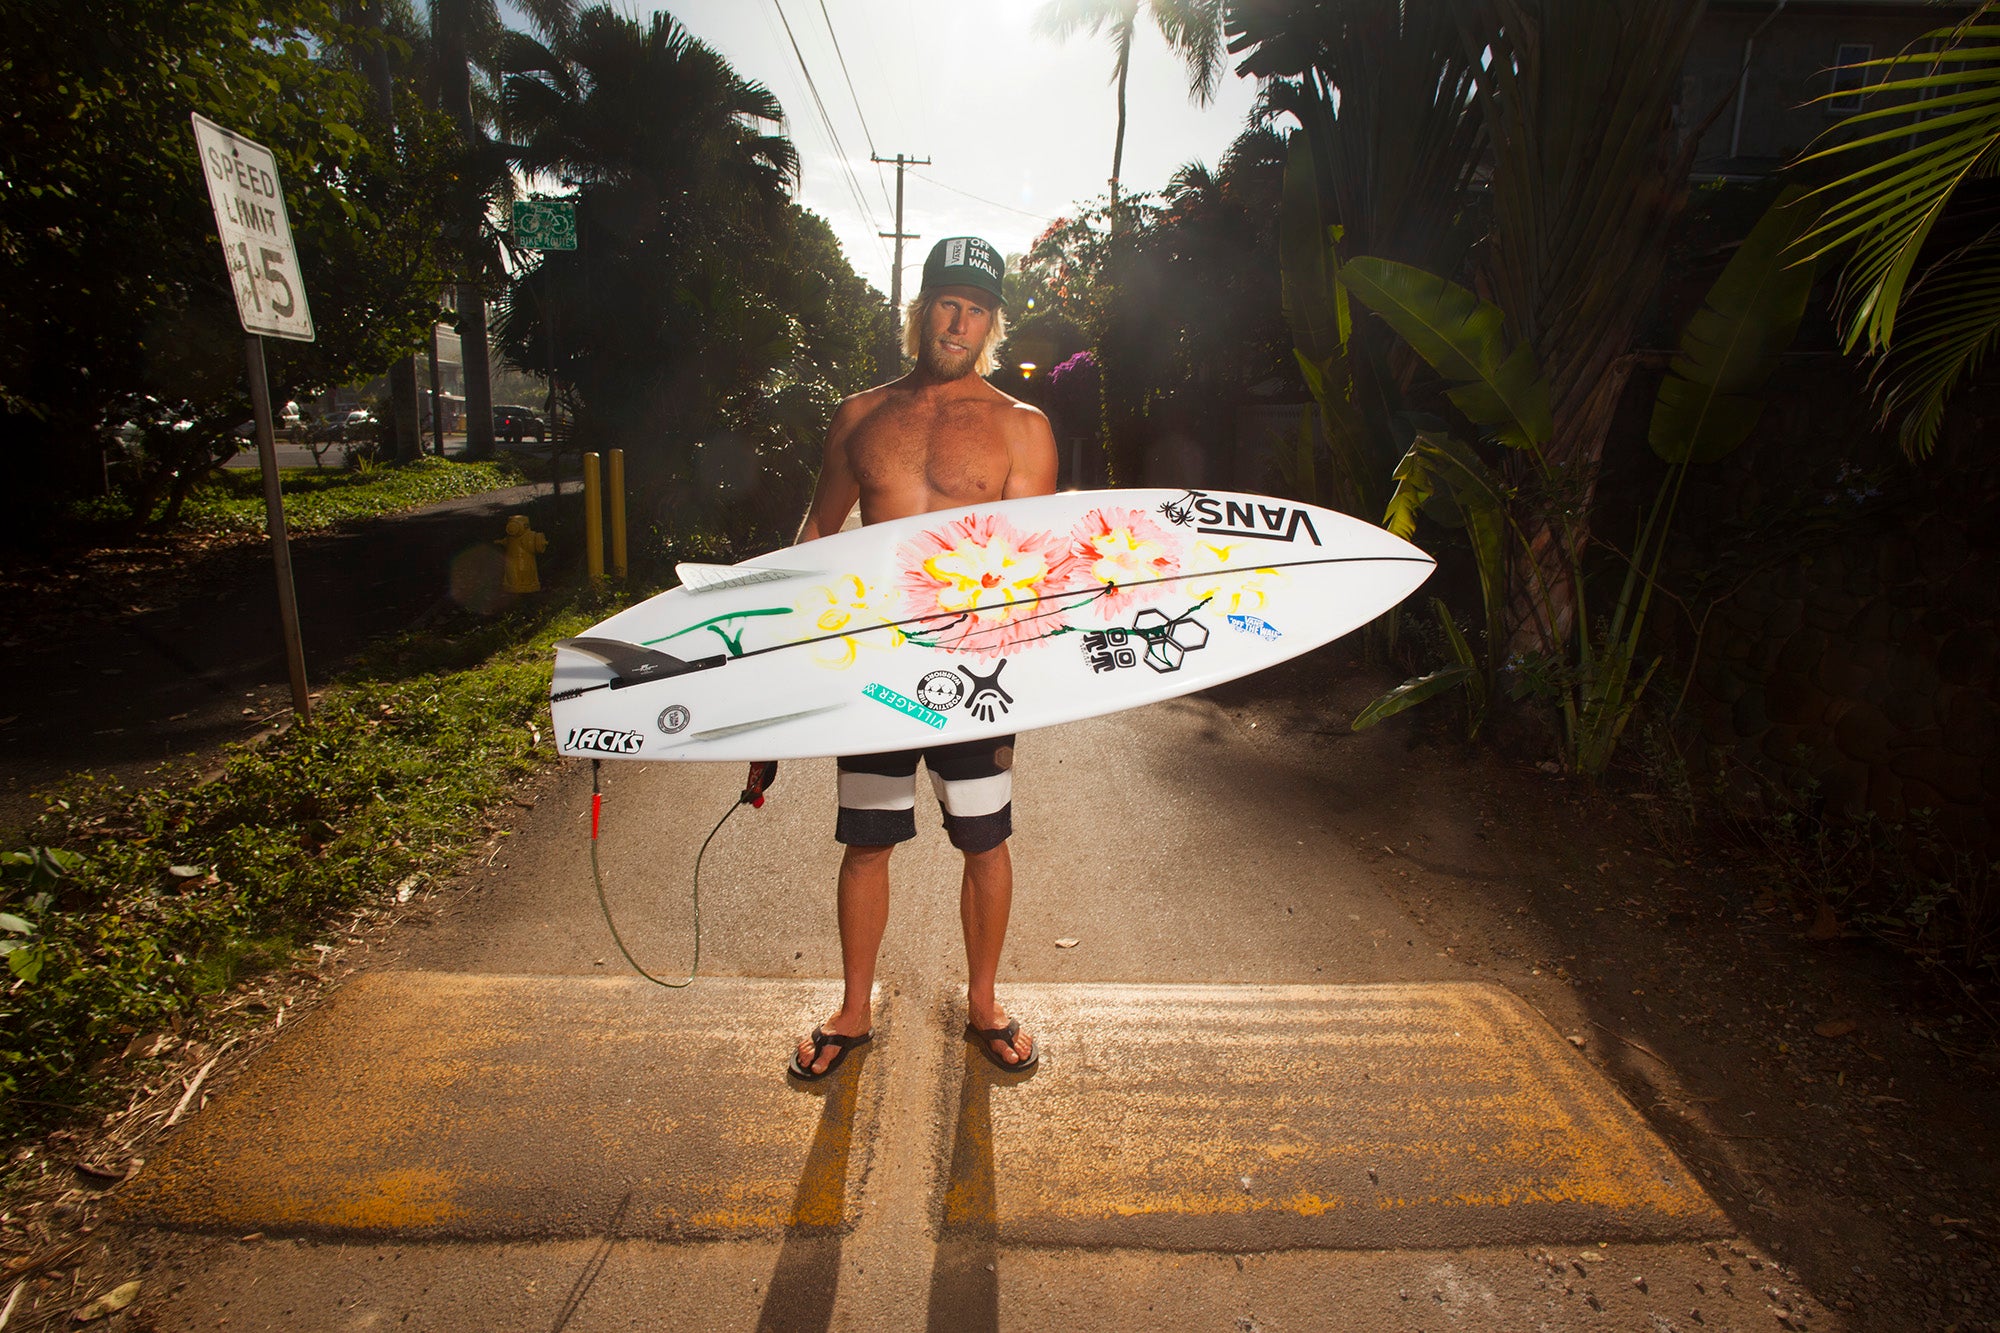 Best of the Best Hybrid One Board Quiver Surfboard Series Ep 2 – Surf 'n  Show - by Noel Salas